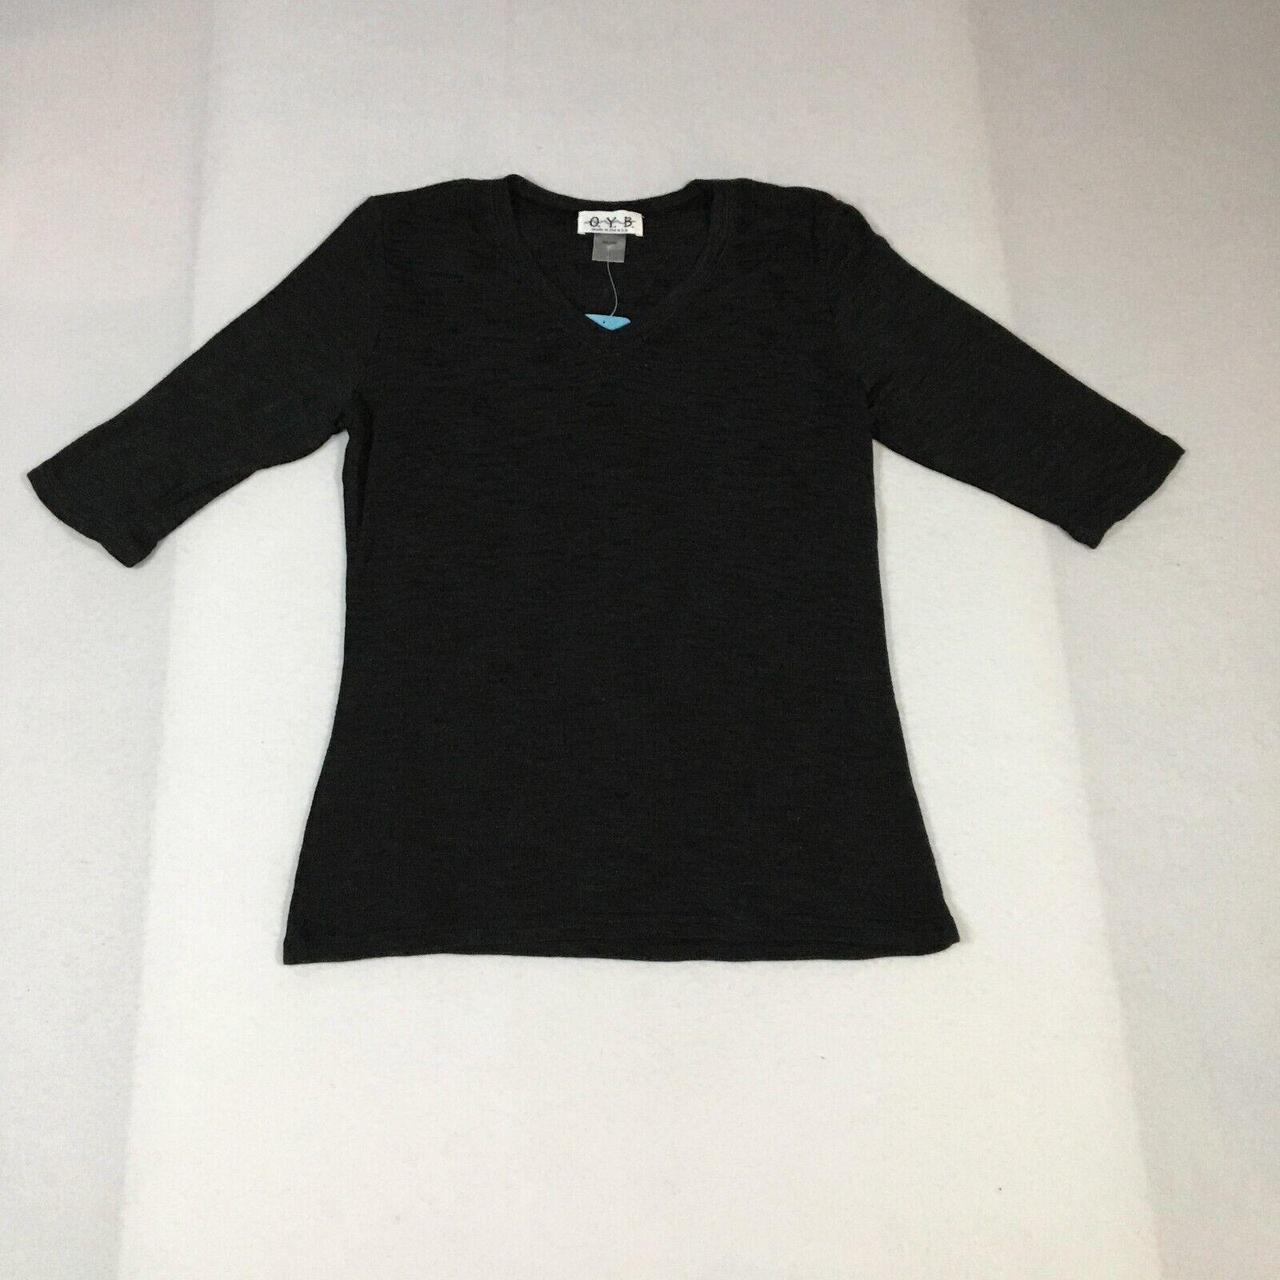 Product Image 1 - O.Y.B Womens Cotton Blend V-Neck